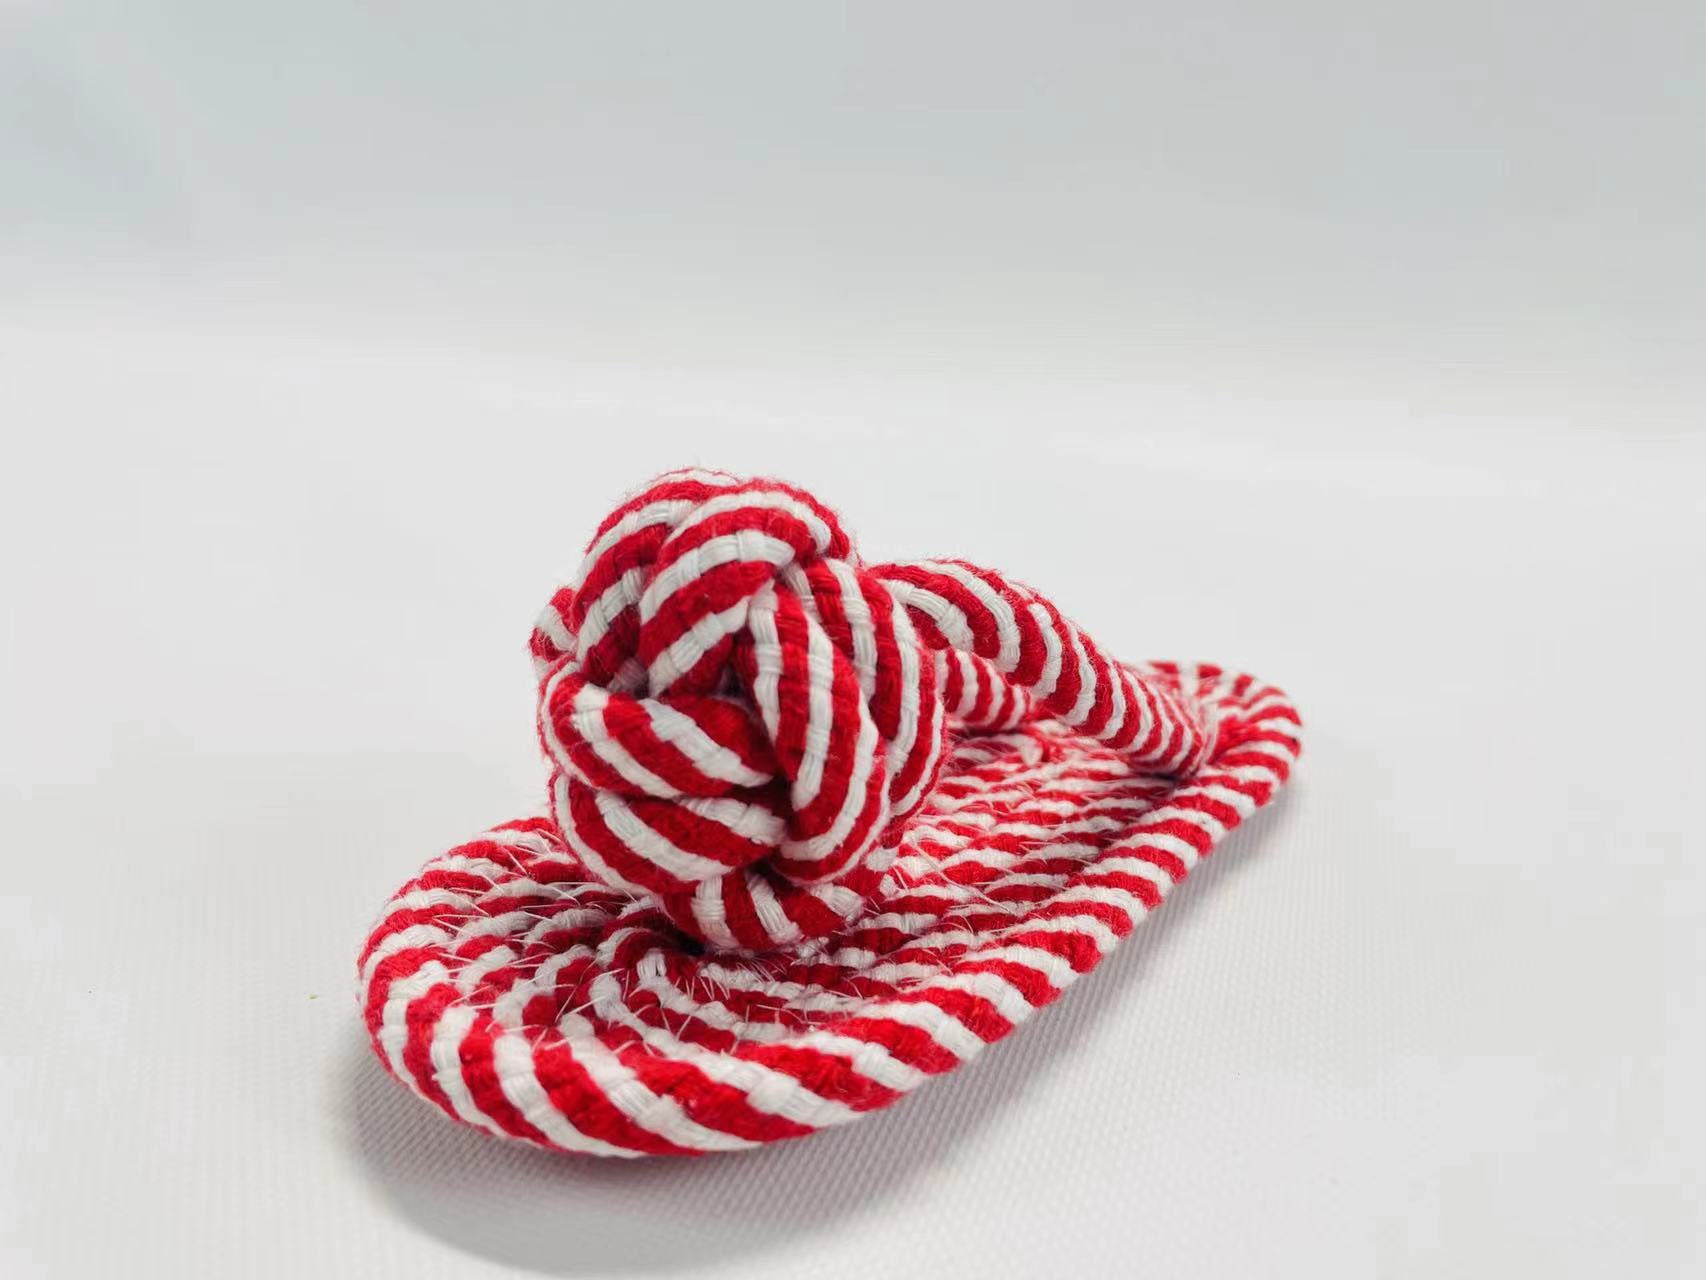 Soft cotton rope woven pet toy for playtime. Ideal for your furry friends! Comfy and fun.